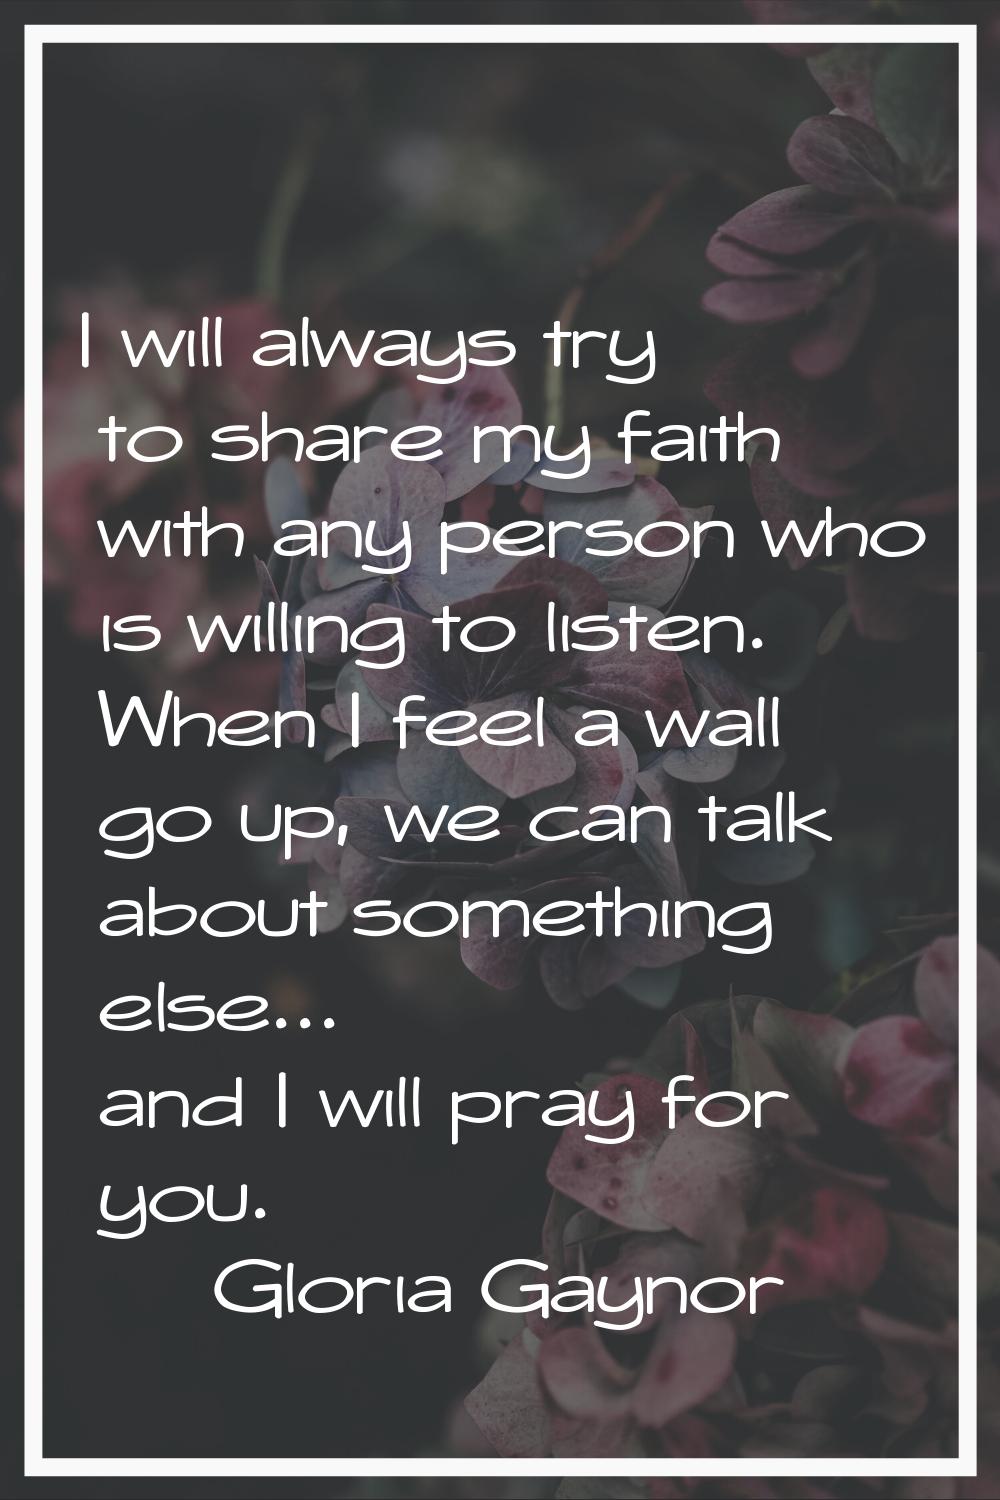 I will always try to share my faith with any person who is willing to listen. When I feel a wall go